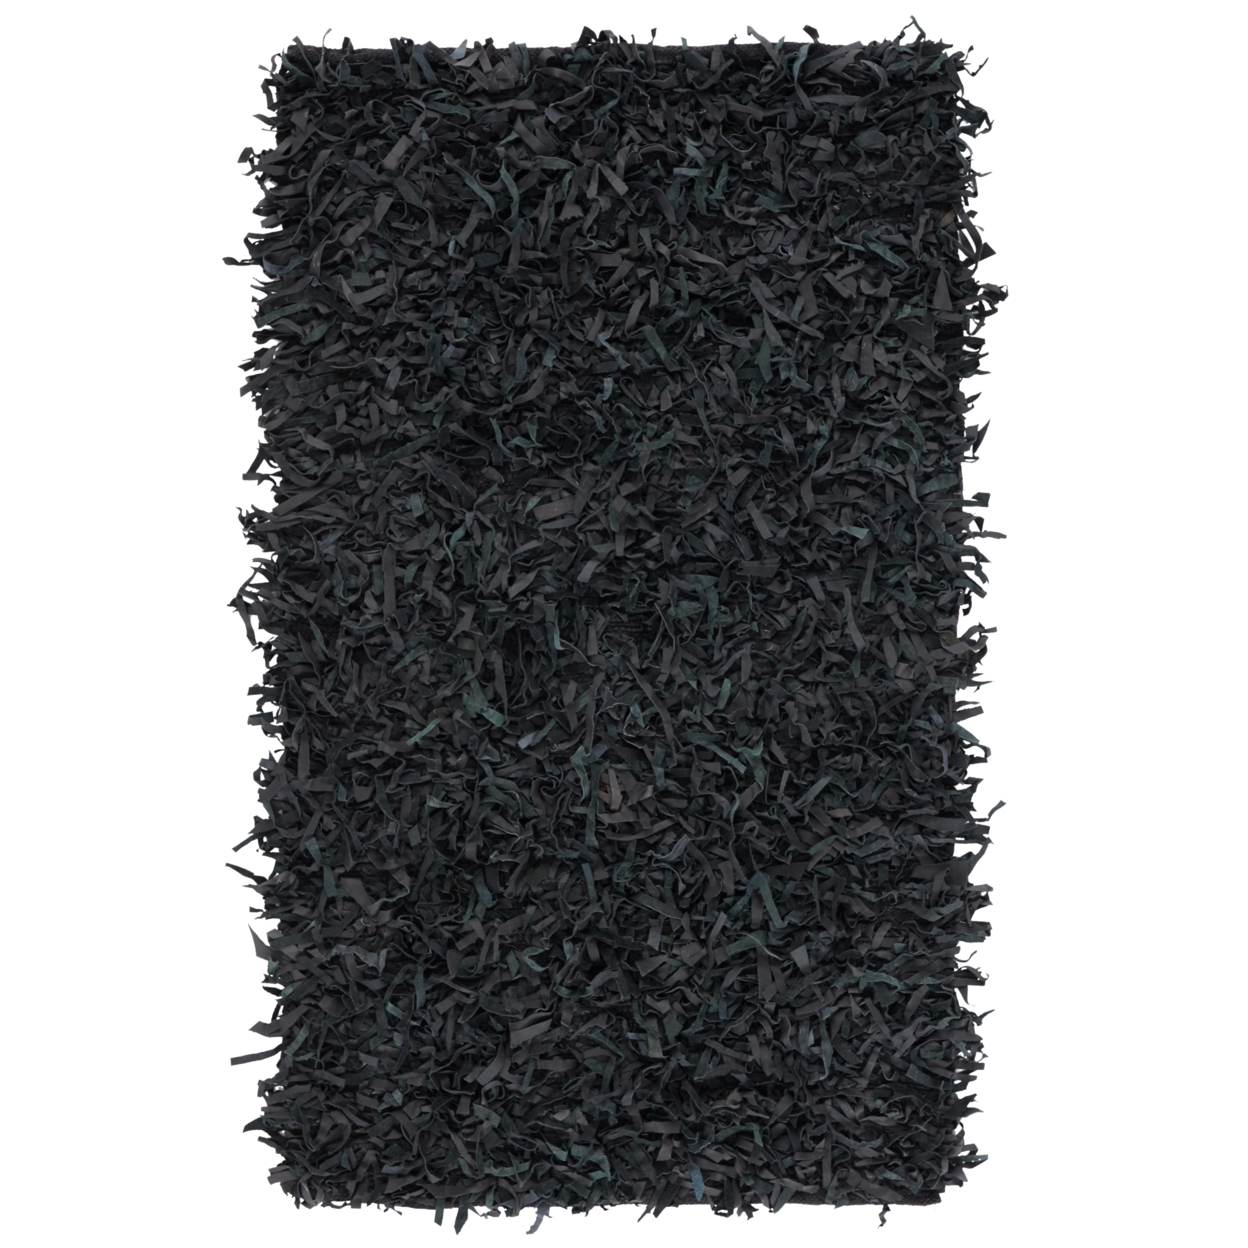 SAFAVIEH Leather Shag LSG511A Hand-knotted Black Rug - 4' X 6'